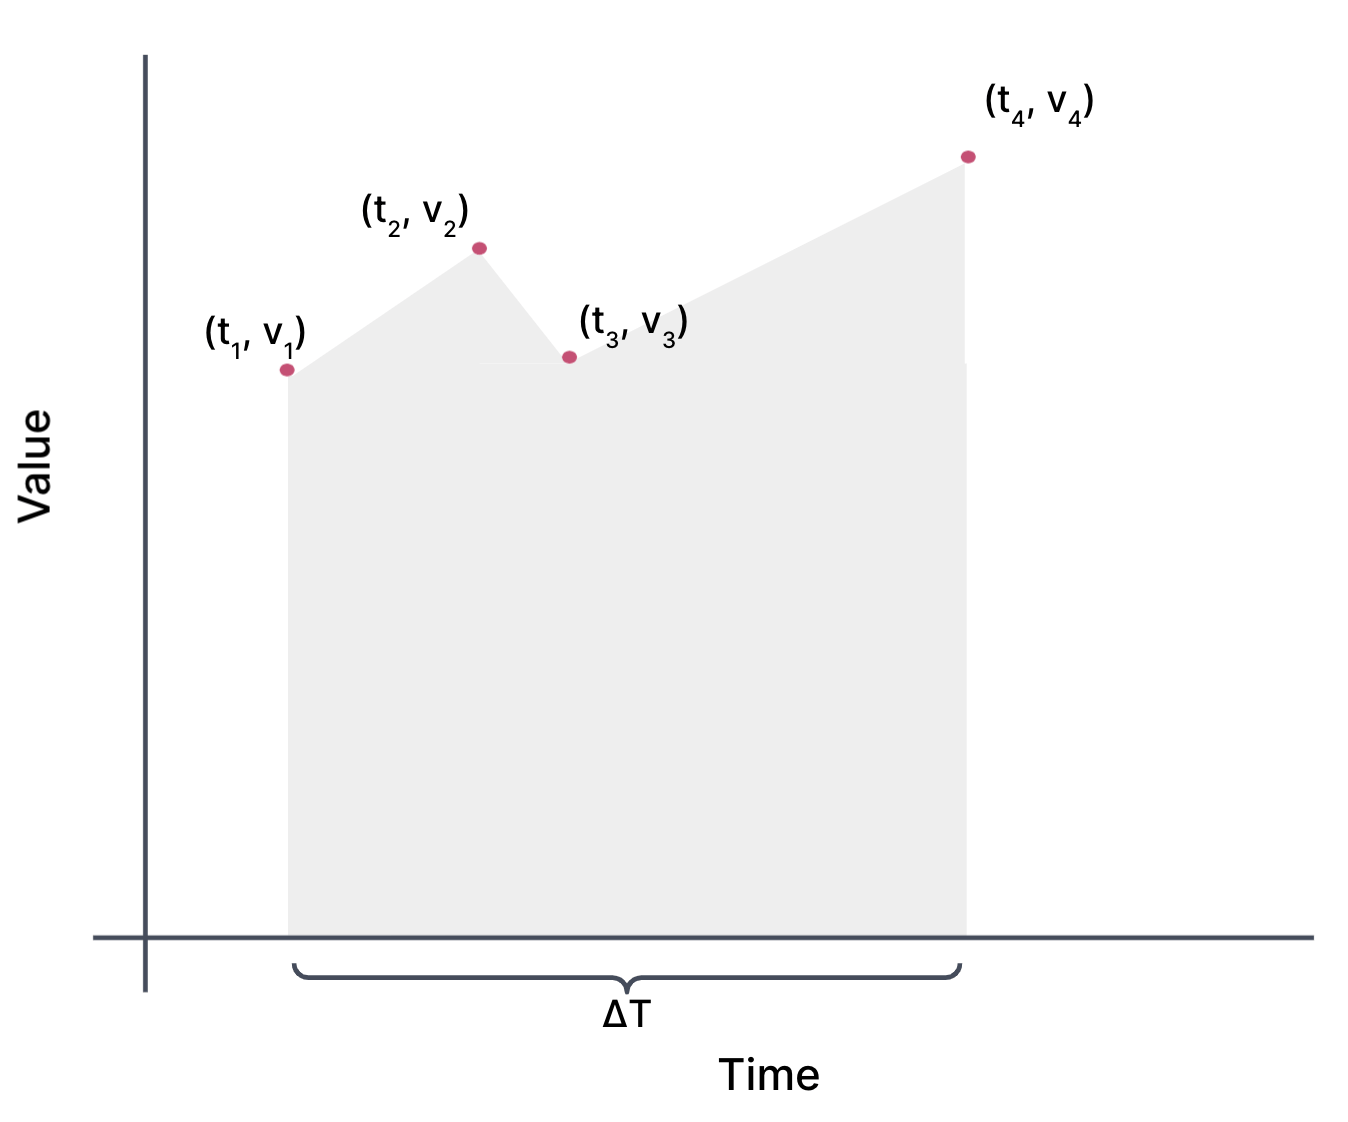 The same graph as above but with the area under the curve shaded in gray. The area under the curve is drawn by drawing a line through each pair of points and then shading down to the x-axis. The total time spanned by the points from t 1 to t 4 is denoted as Delta T.